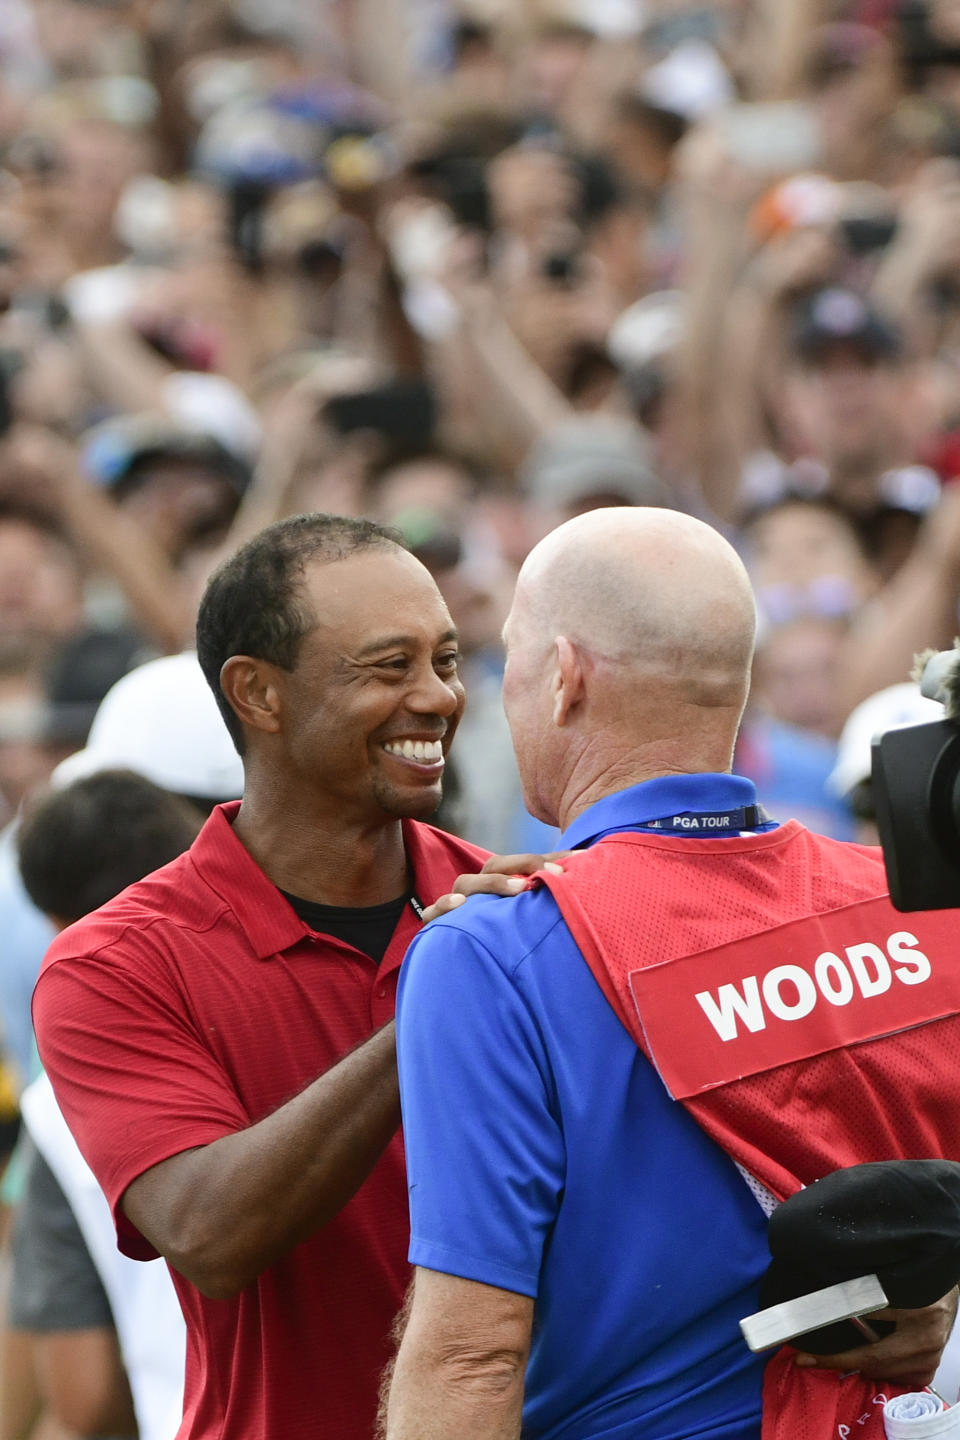 Tiger Woods and caddie Joe LaCava, right, congratulate each other after winning the Tour Championship golf tournament Sunday, Sept. 23, 2018, in Atlanta. (AP Photo/John Amis)